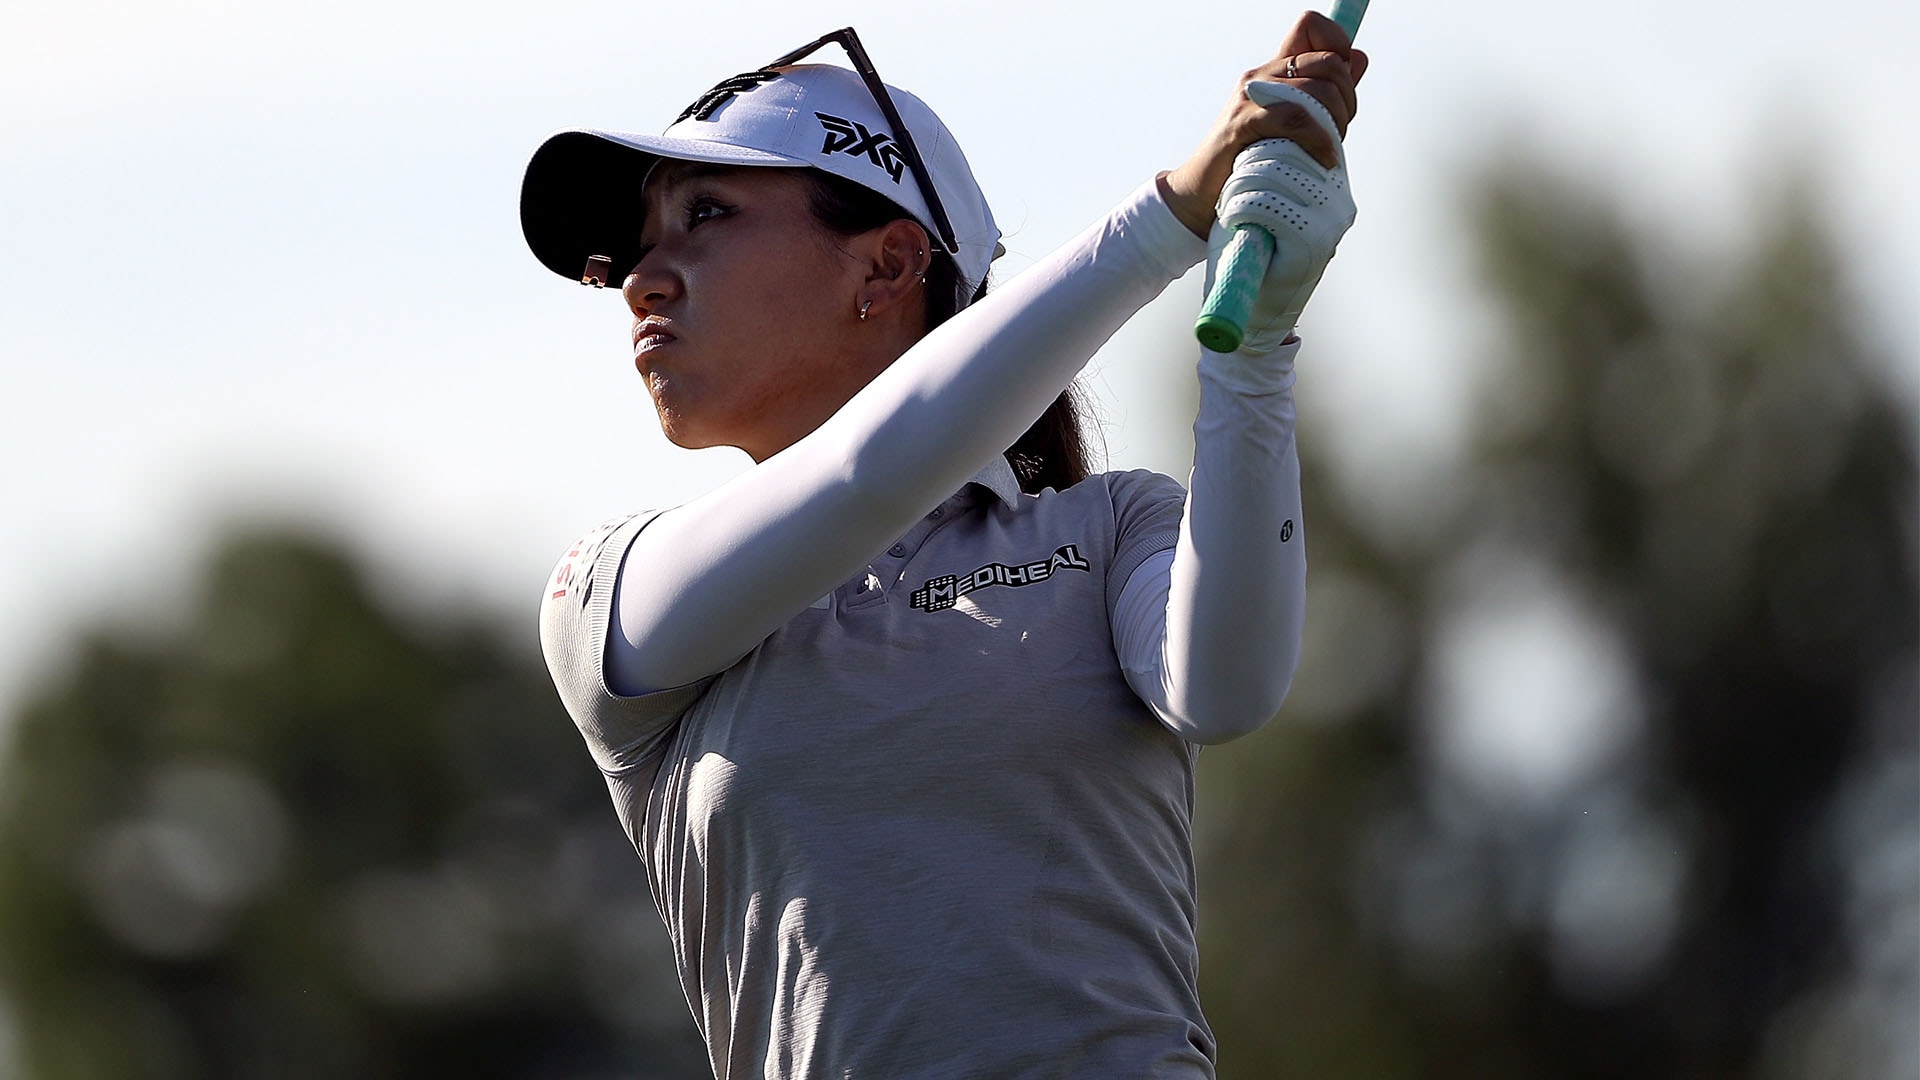 Lydia Ko (69) off to hot start in Ohio with (another) new swing coach